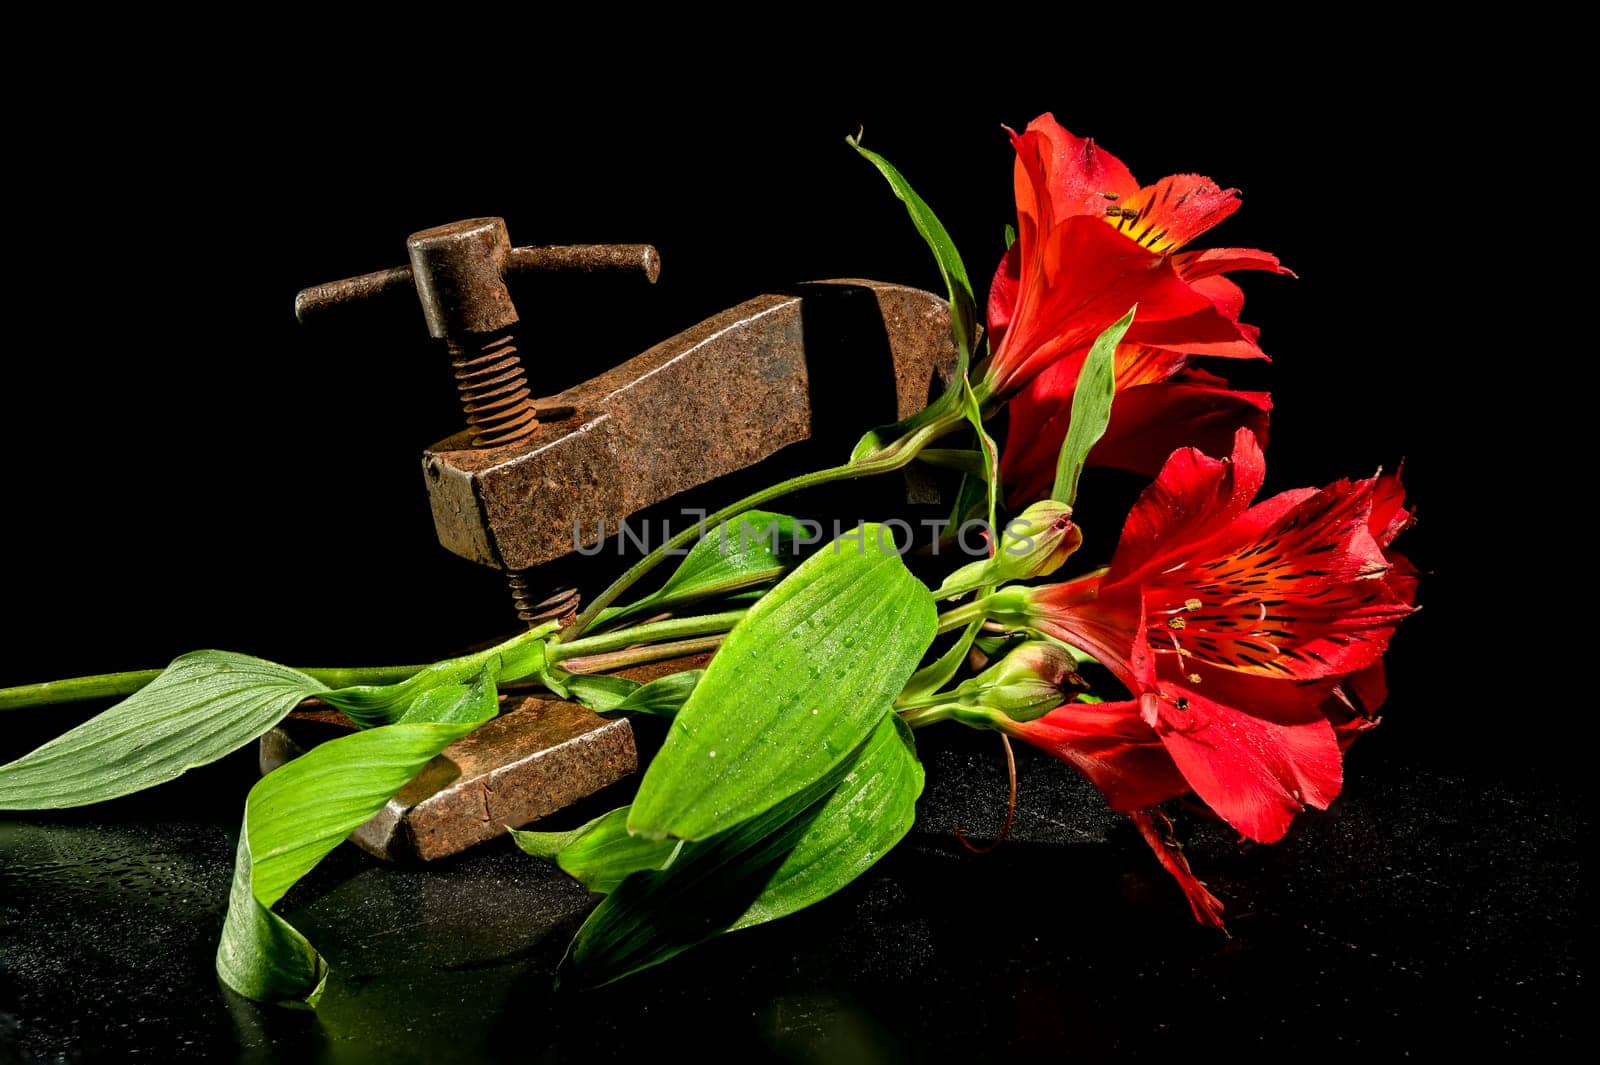 Creative still life with old rusty metal clamp and red Alstroemeria flower on a black background